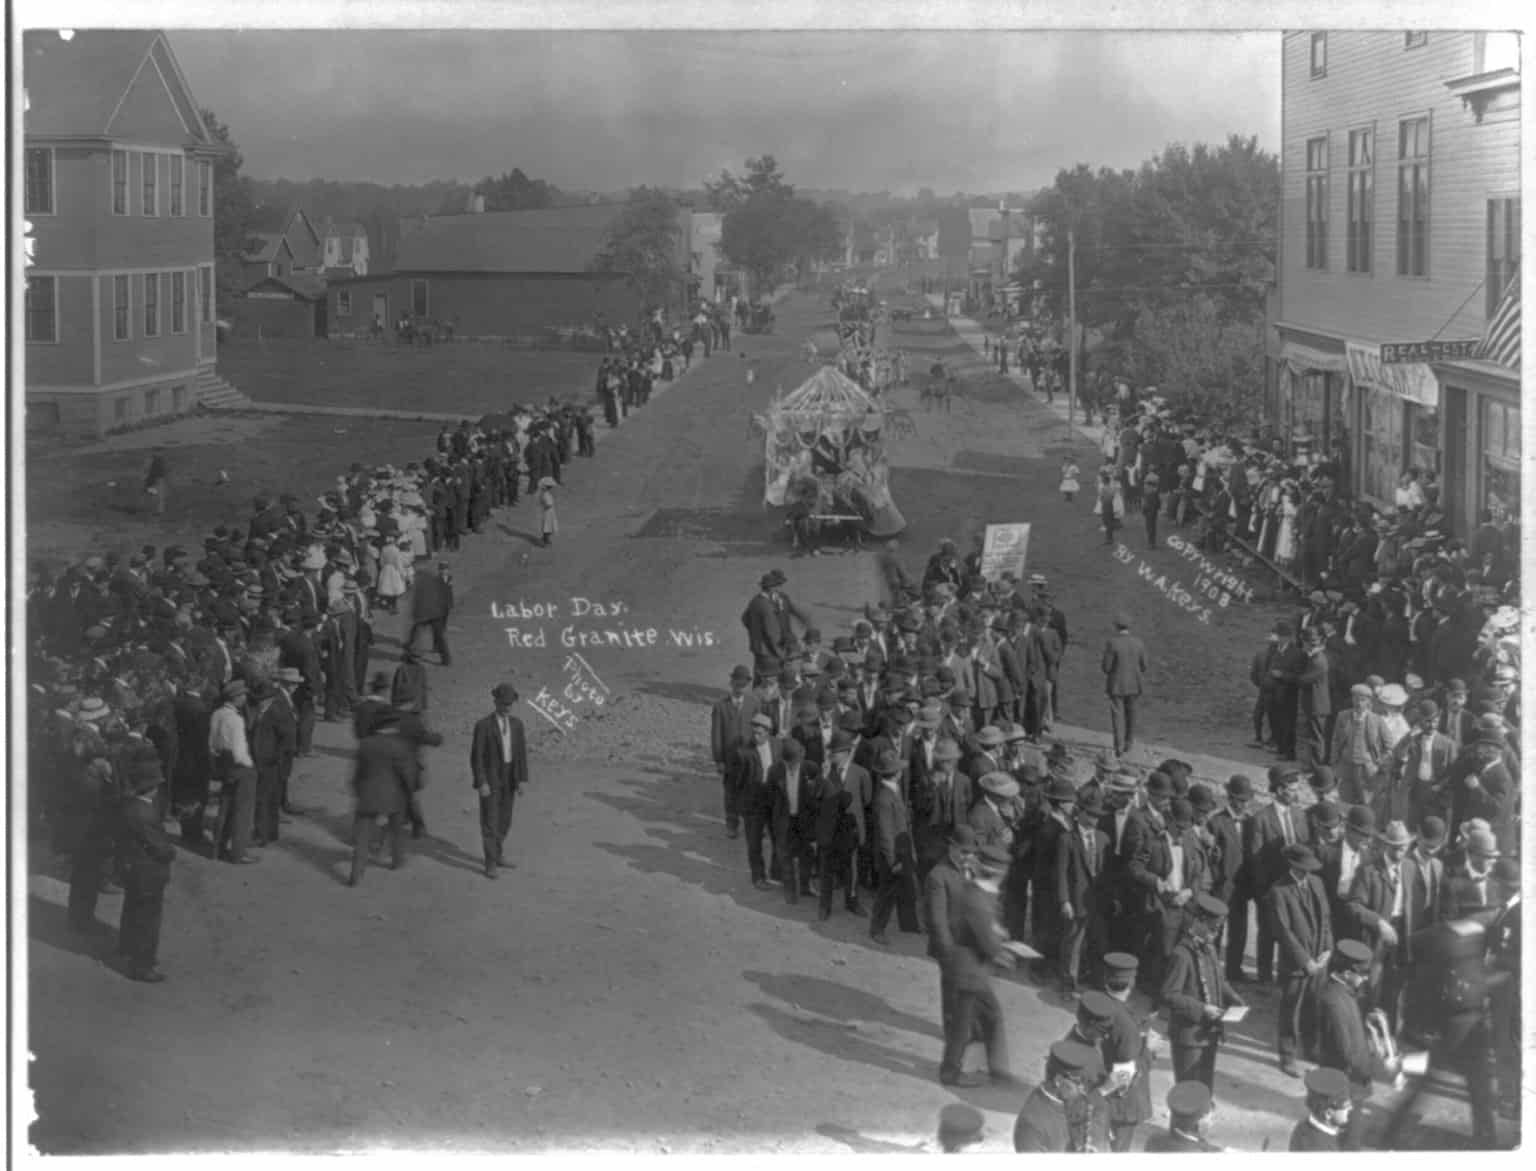 Happy Labor Day Parade Red Granite Wisconsin 1908